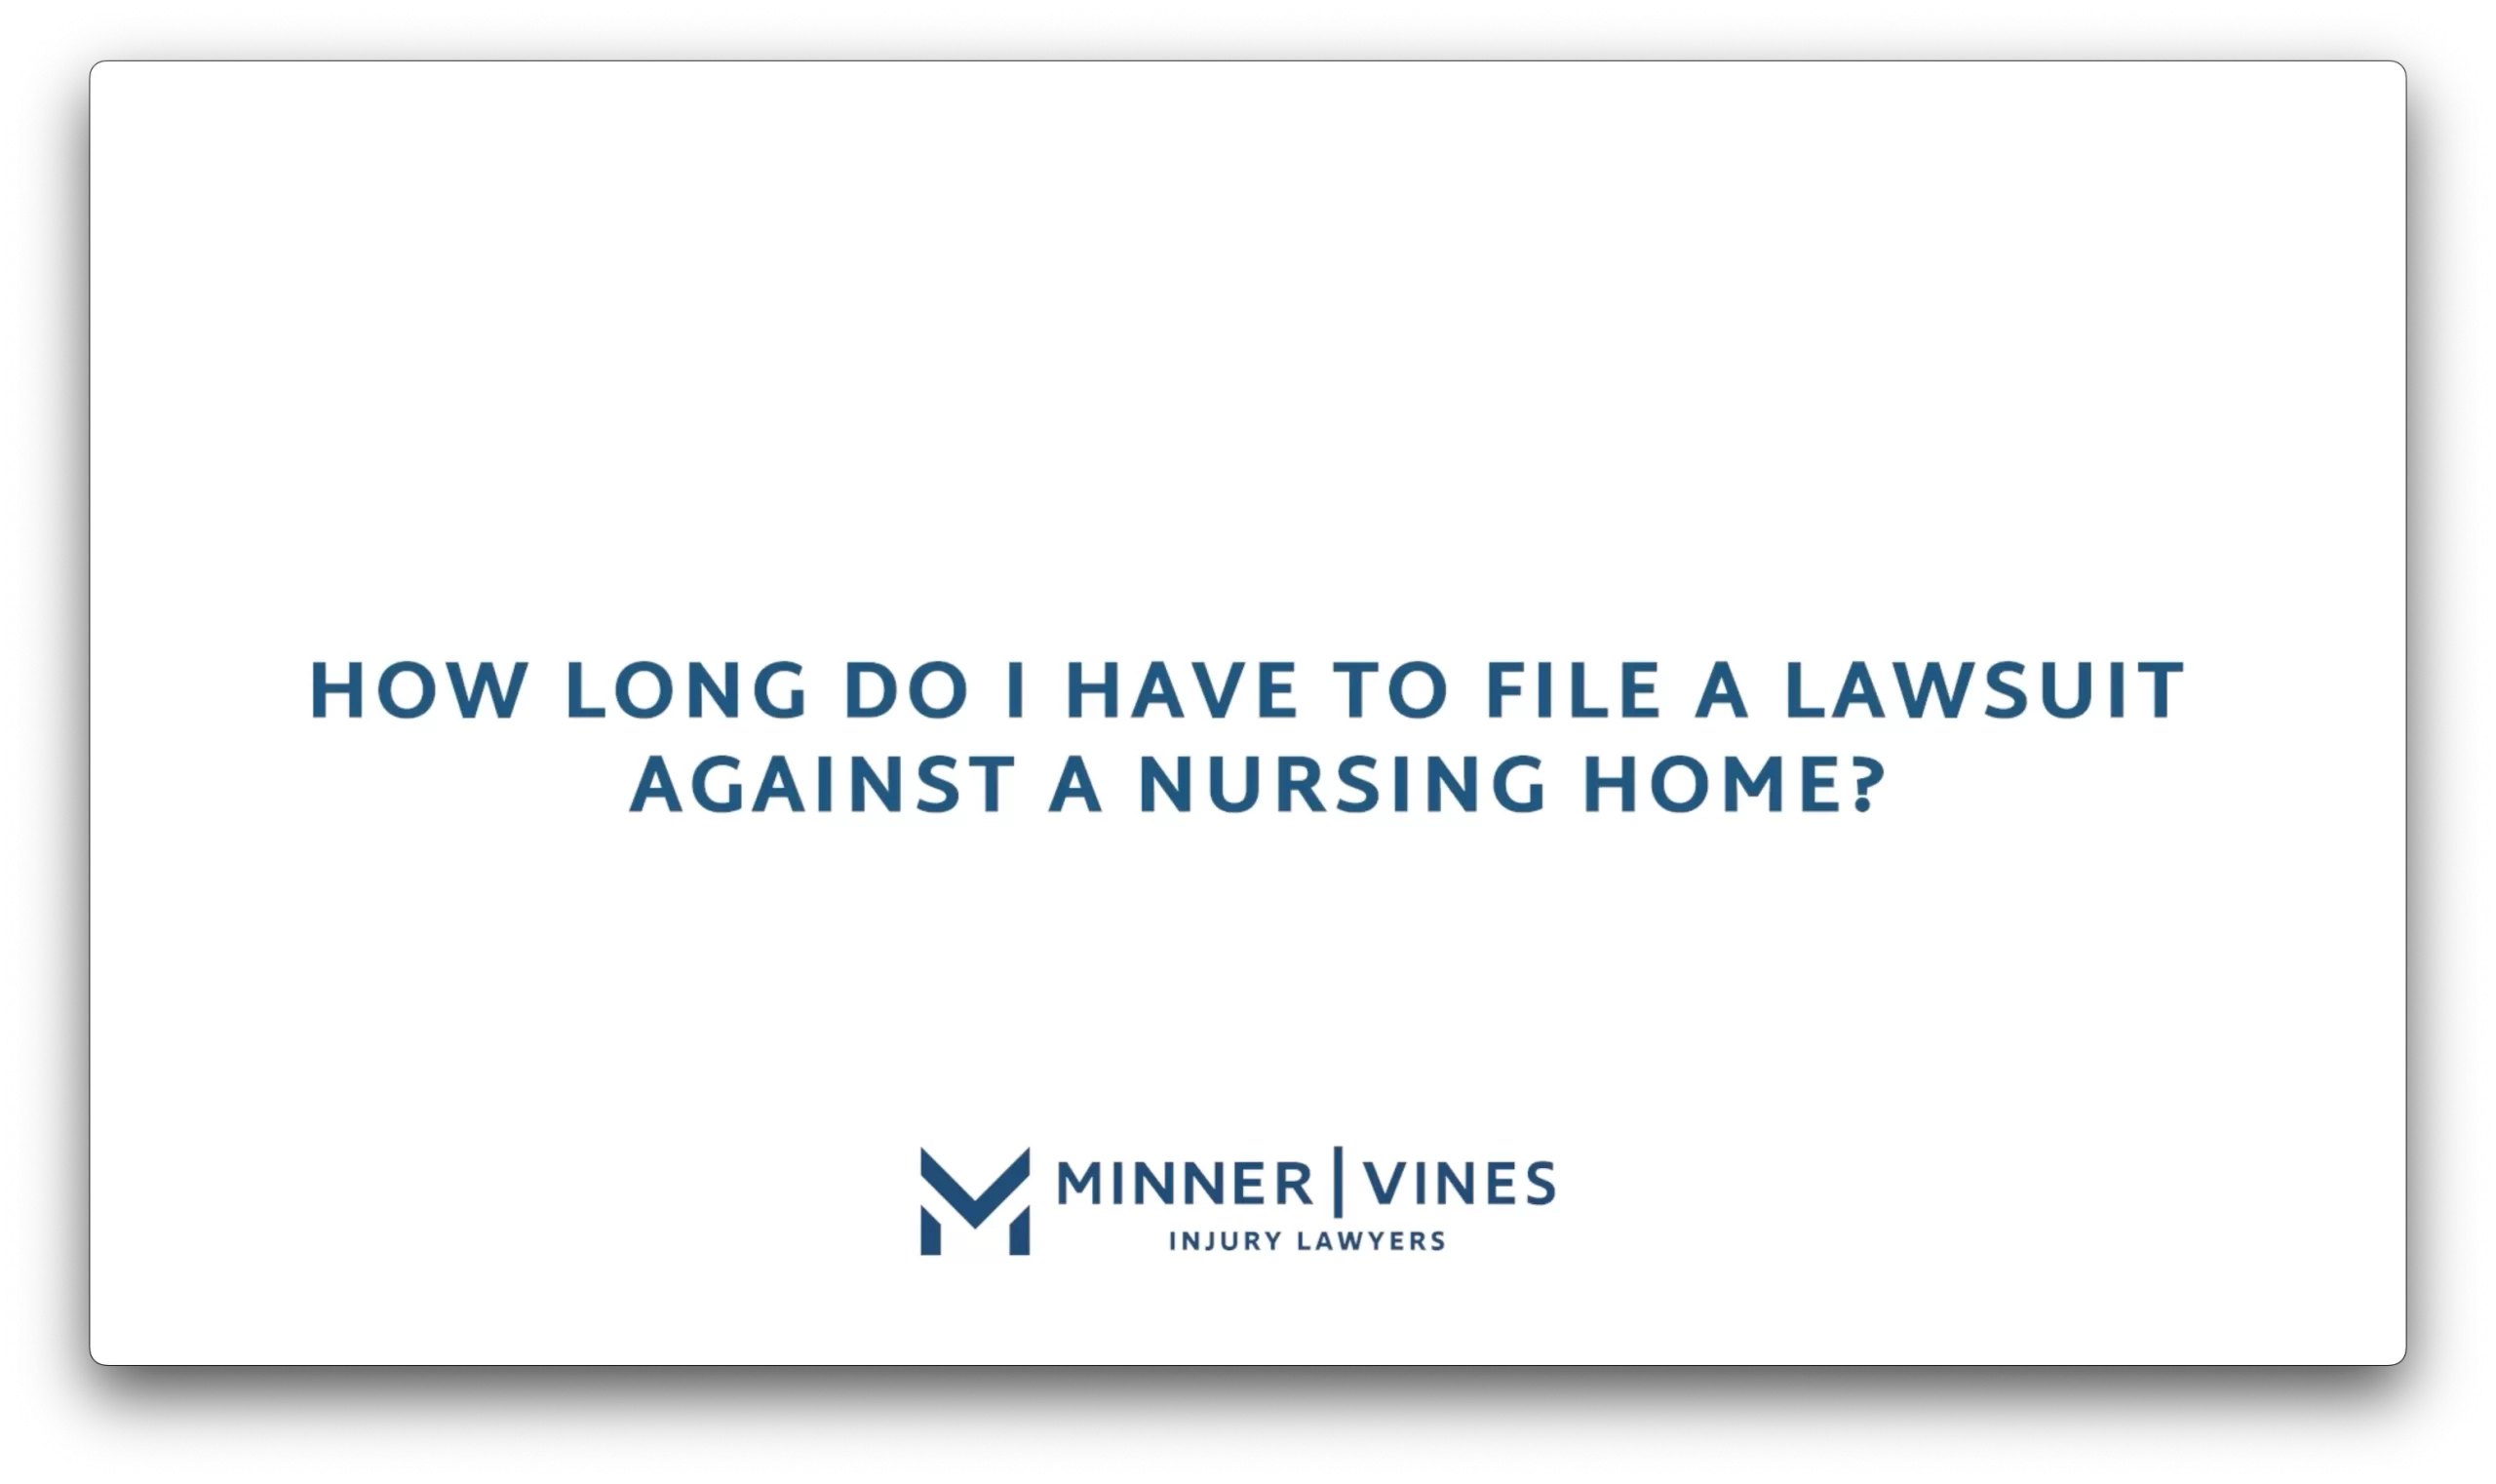 How long do I have to file a lawsuit against a nursing home?